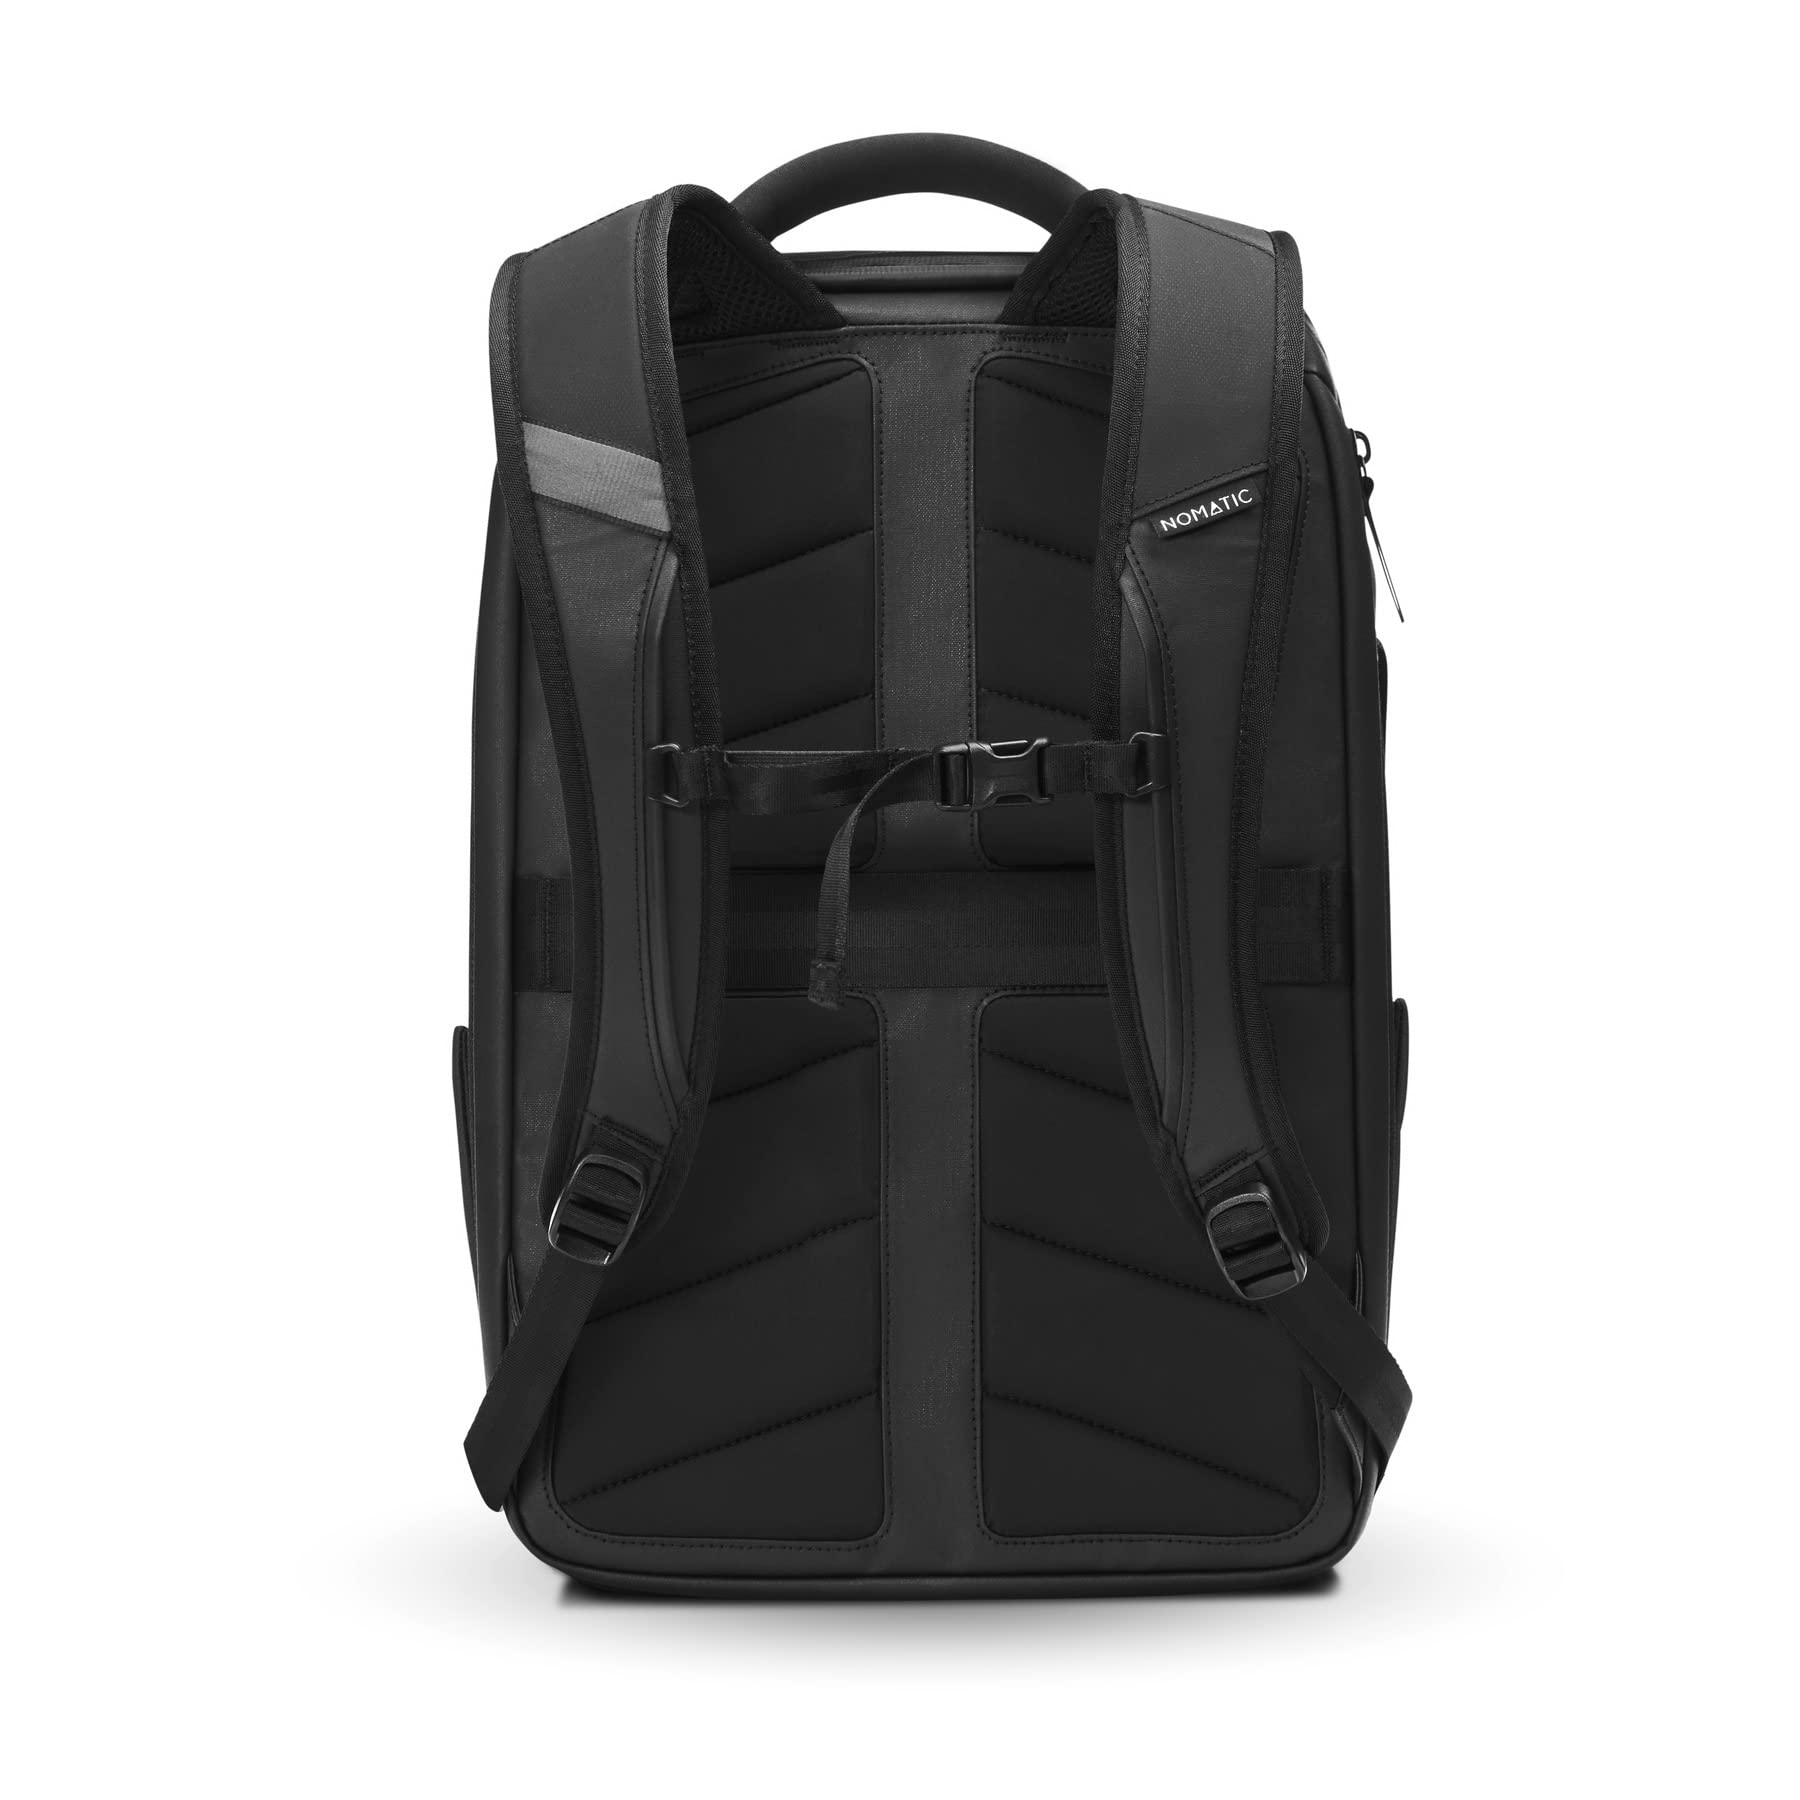 NOMATIC Travel Pack - Water Resistant Anti-Theft Bag- Flight Approved Carry On Laptop Bag- Computer Backpack- Tech Backpack